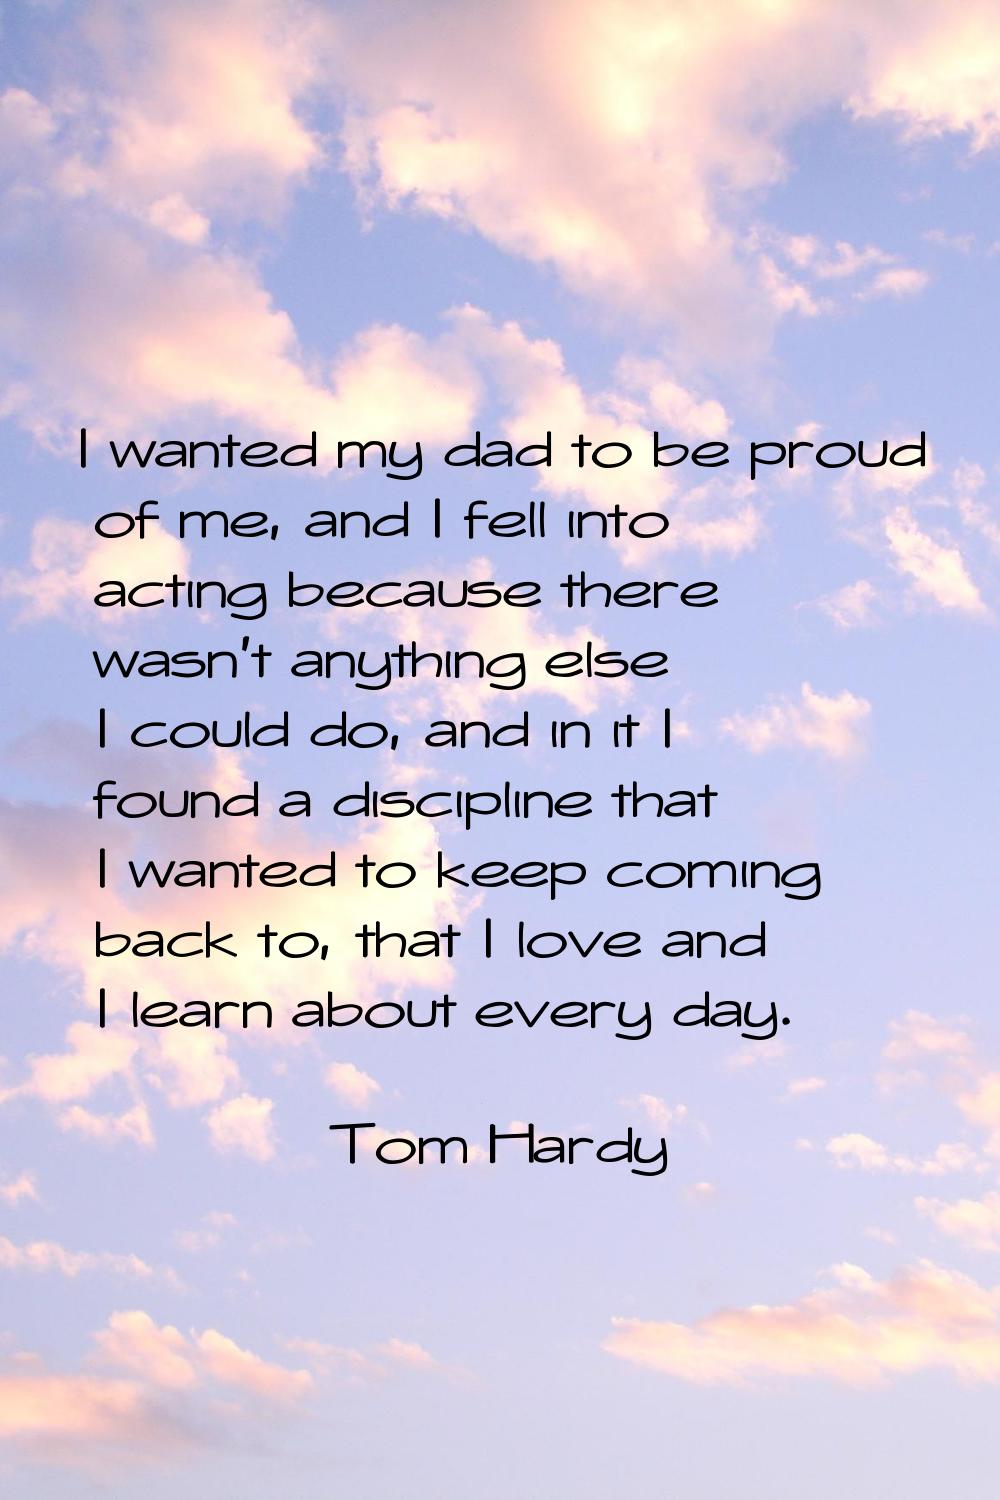 I wanted my dad to be proud of me, and I fell into acting because there wasn't anything else I coul